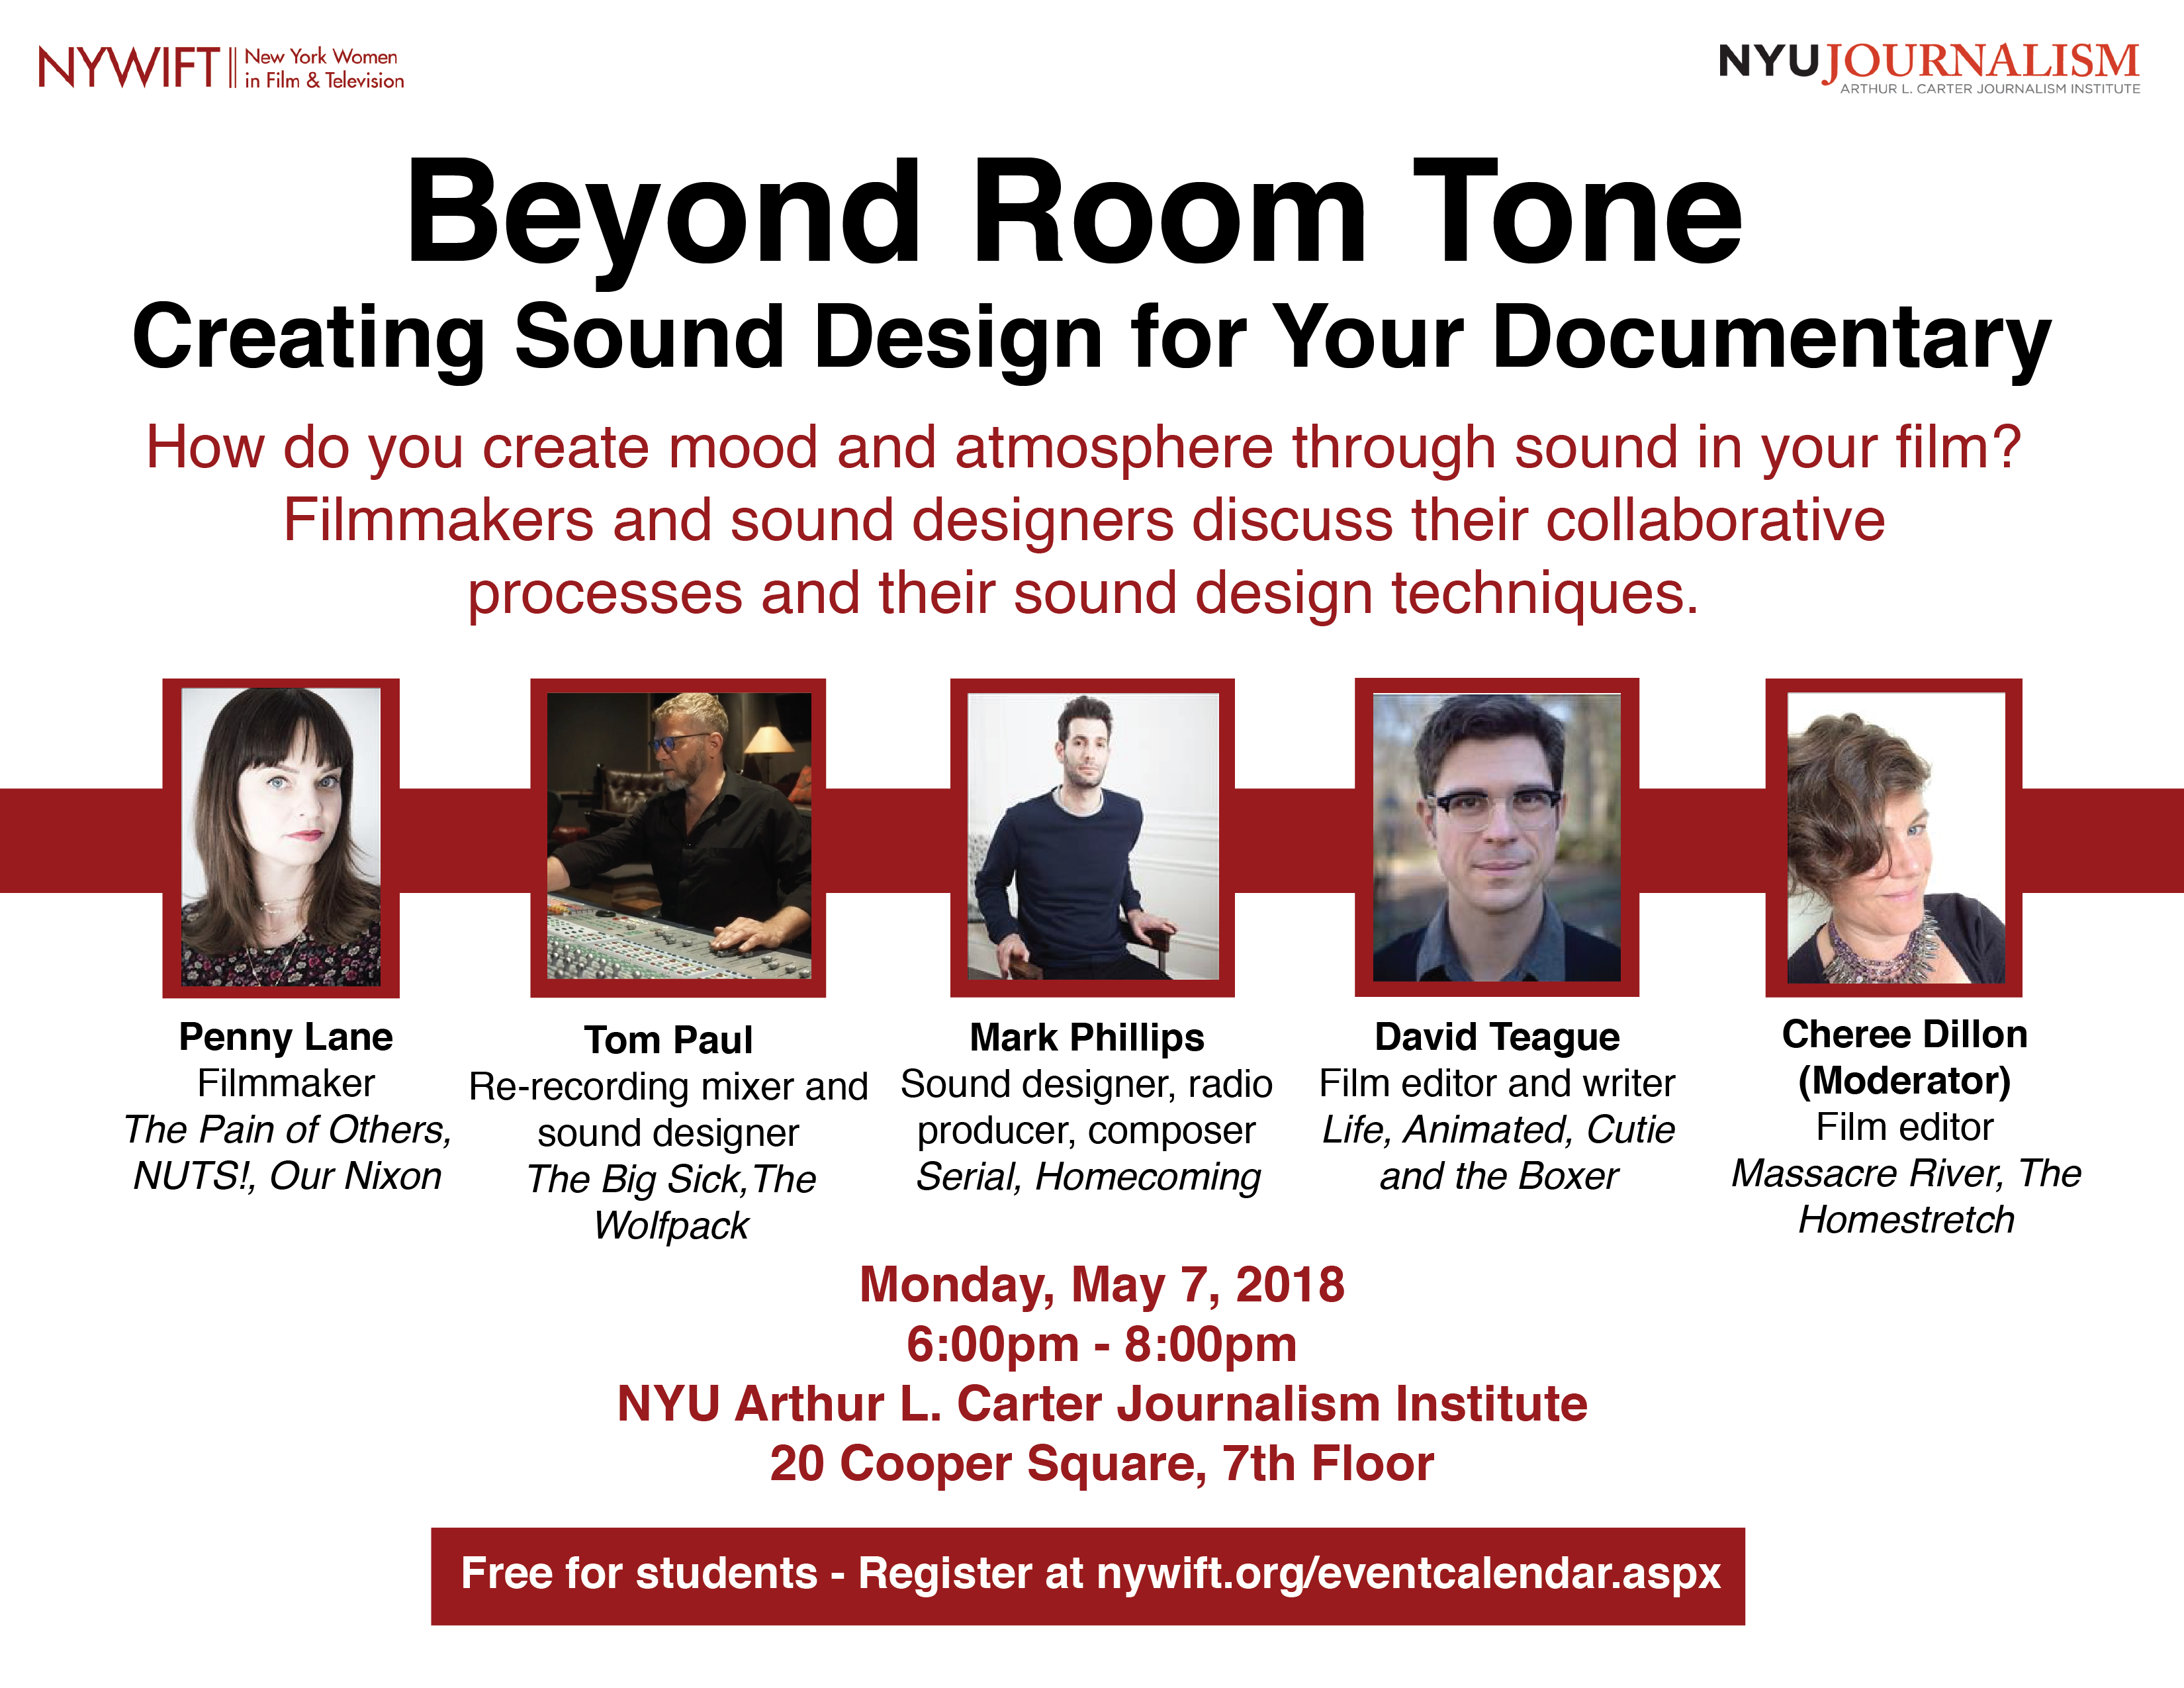 Beyond Room Tone: Creating Sound Design for Your Documentary - 2018 Poster